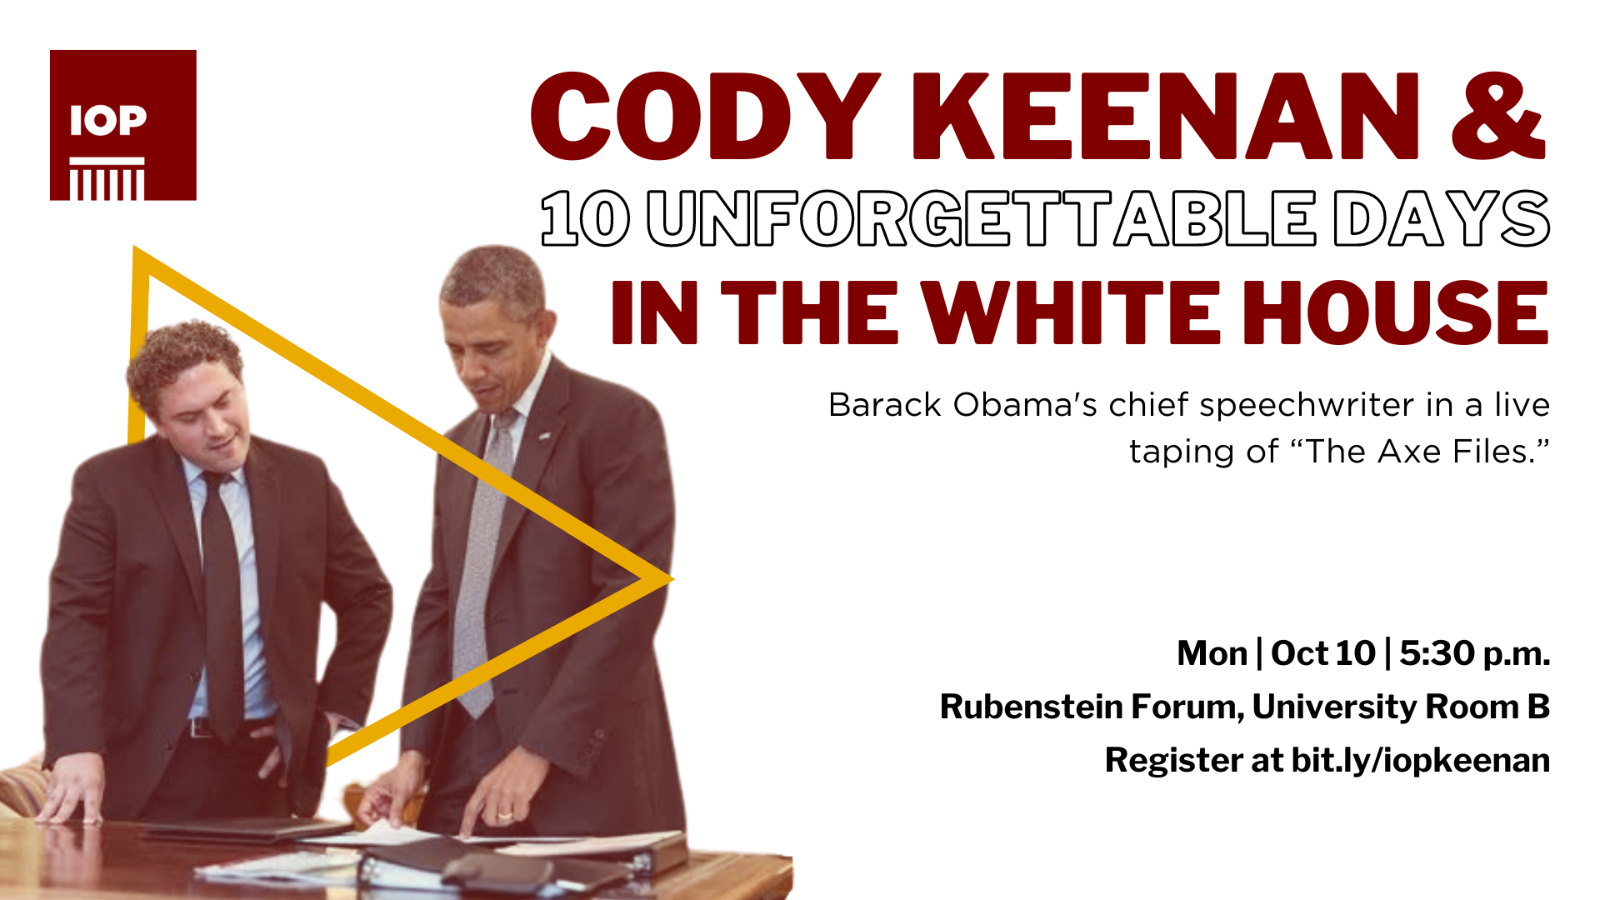 Cody Keenan and Ten Unforgettable Days in the White House